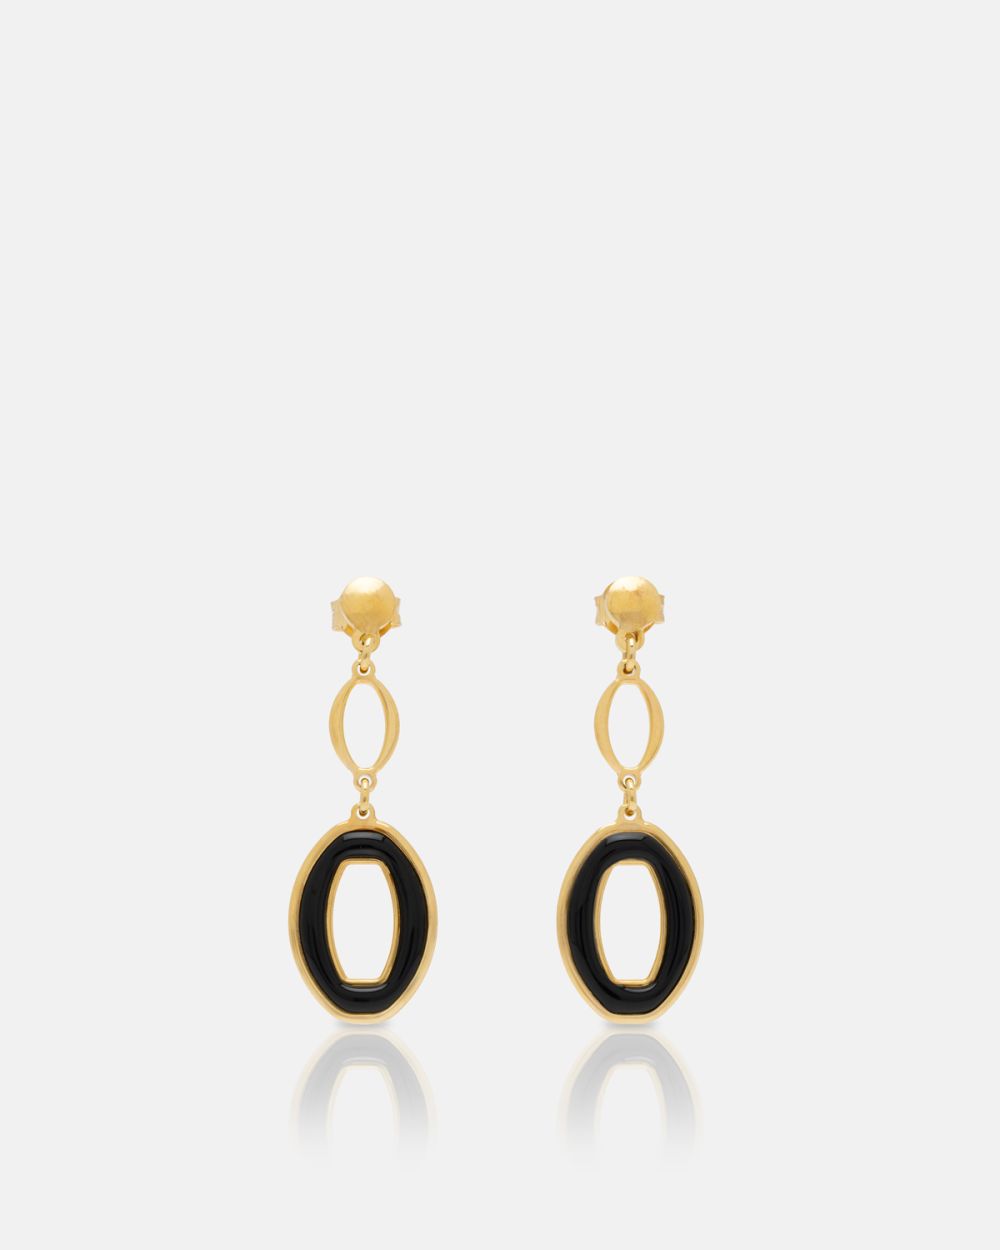 Moonless Earrings in Gold Plated Silver